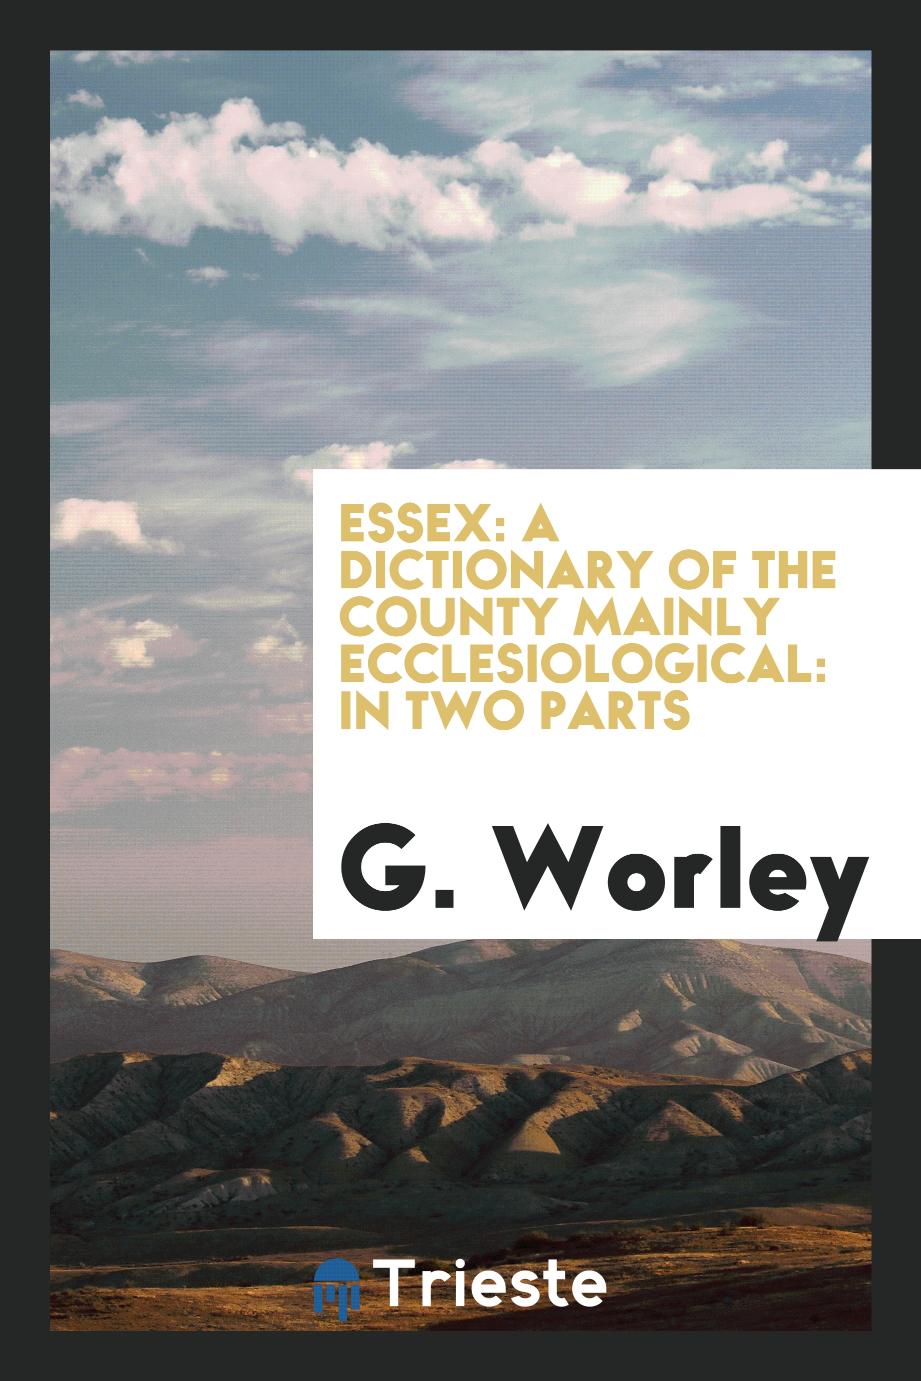 Essex: a dictionary of the county mainly ecclesiological: in two parts